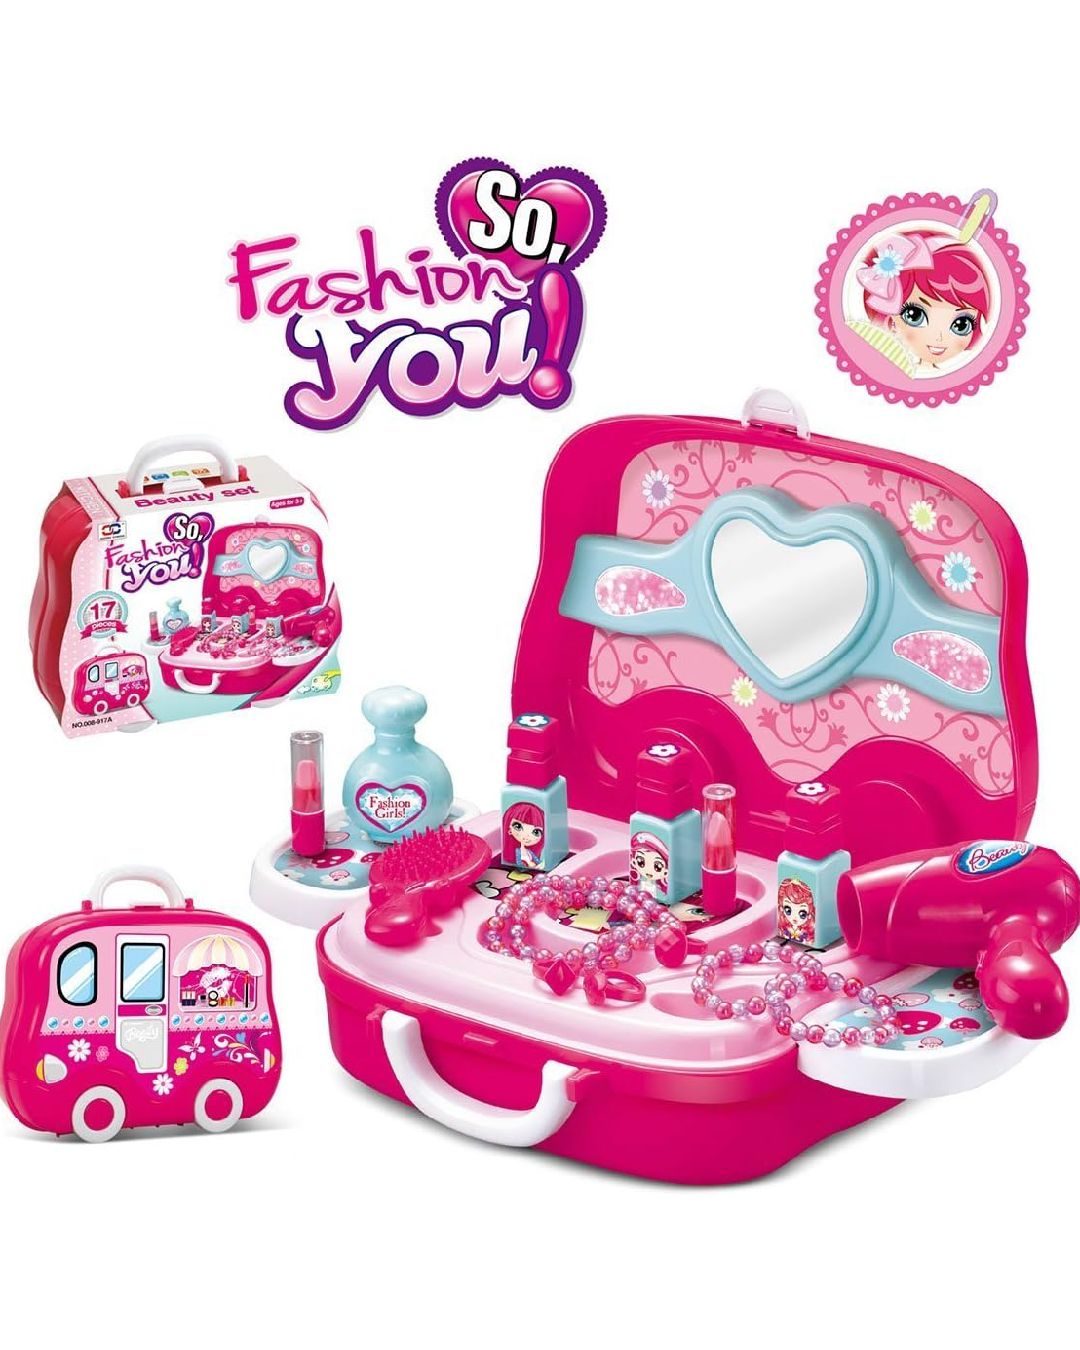 Fashion Set in Carry Case with Wheels Role Play Set